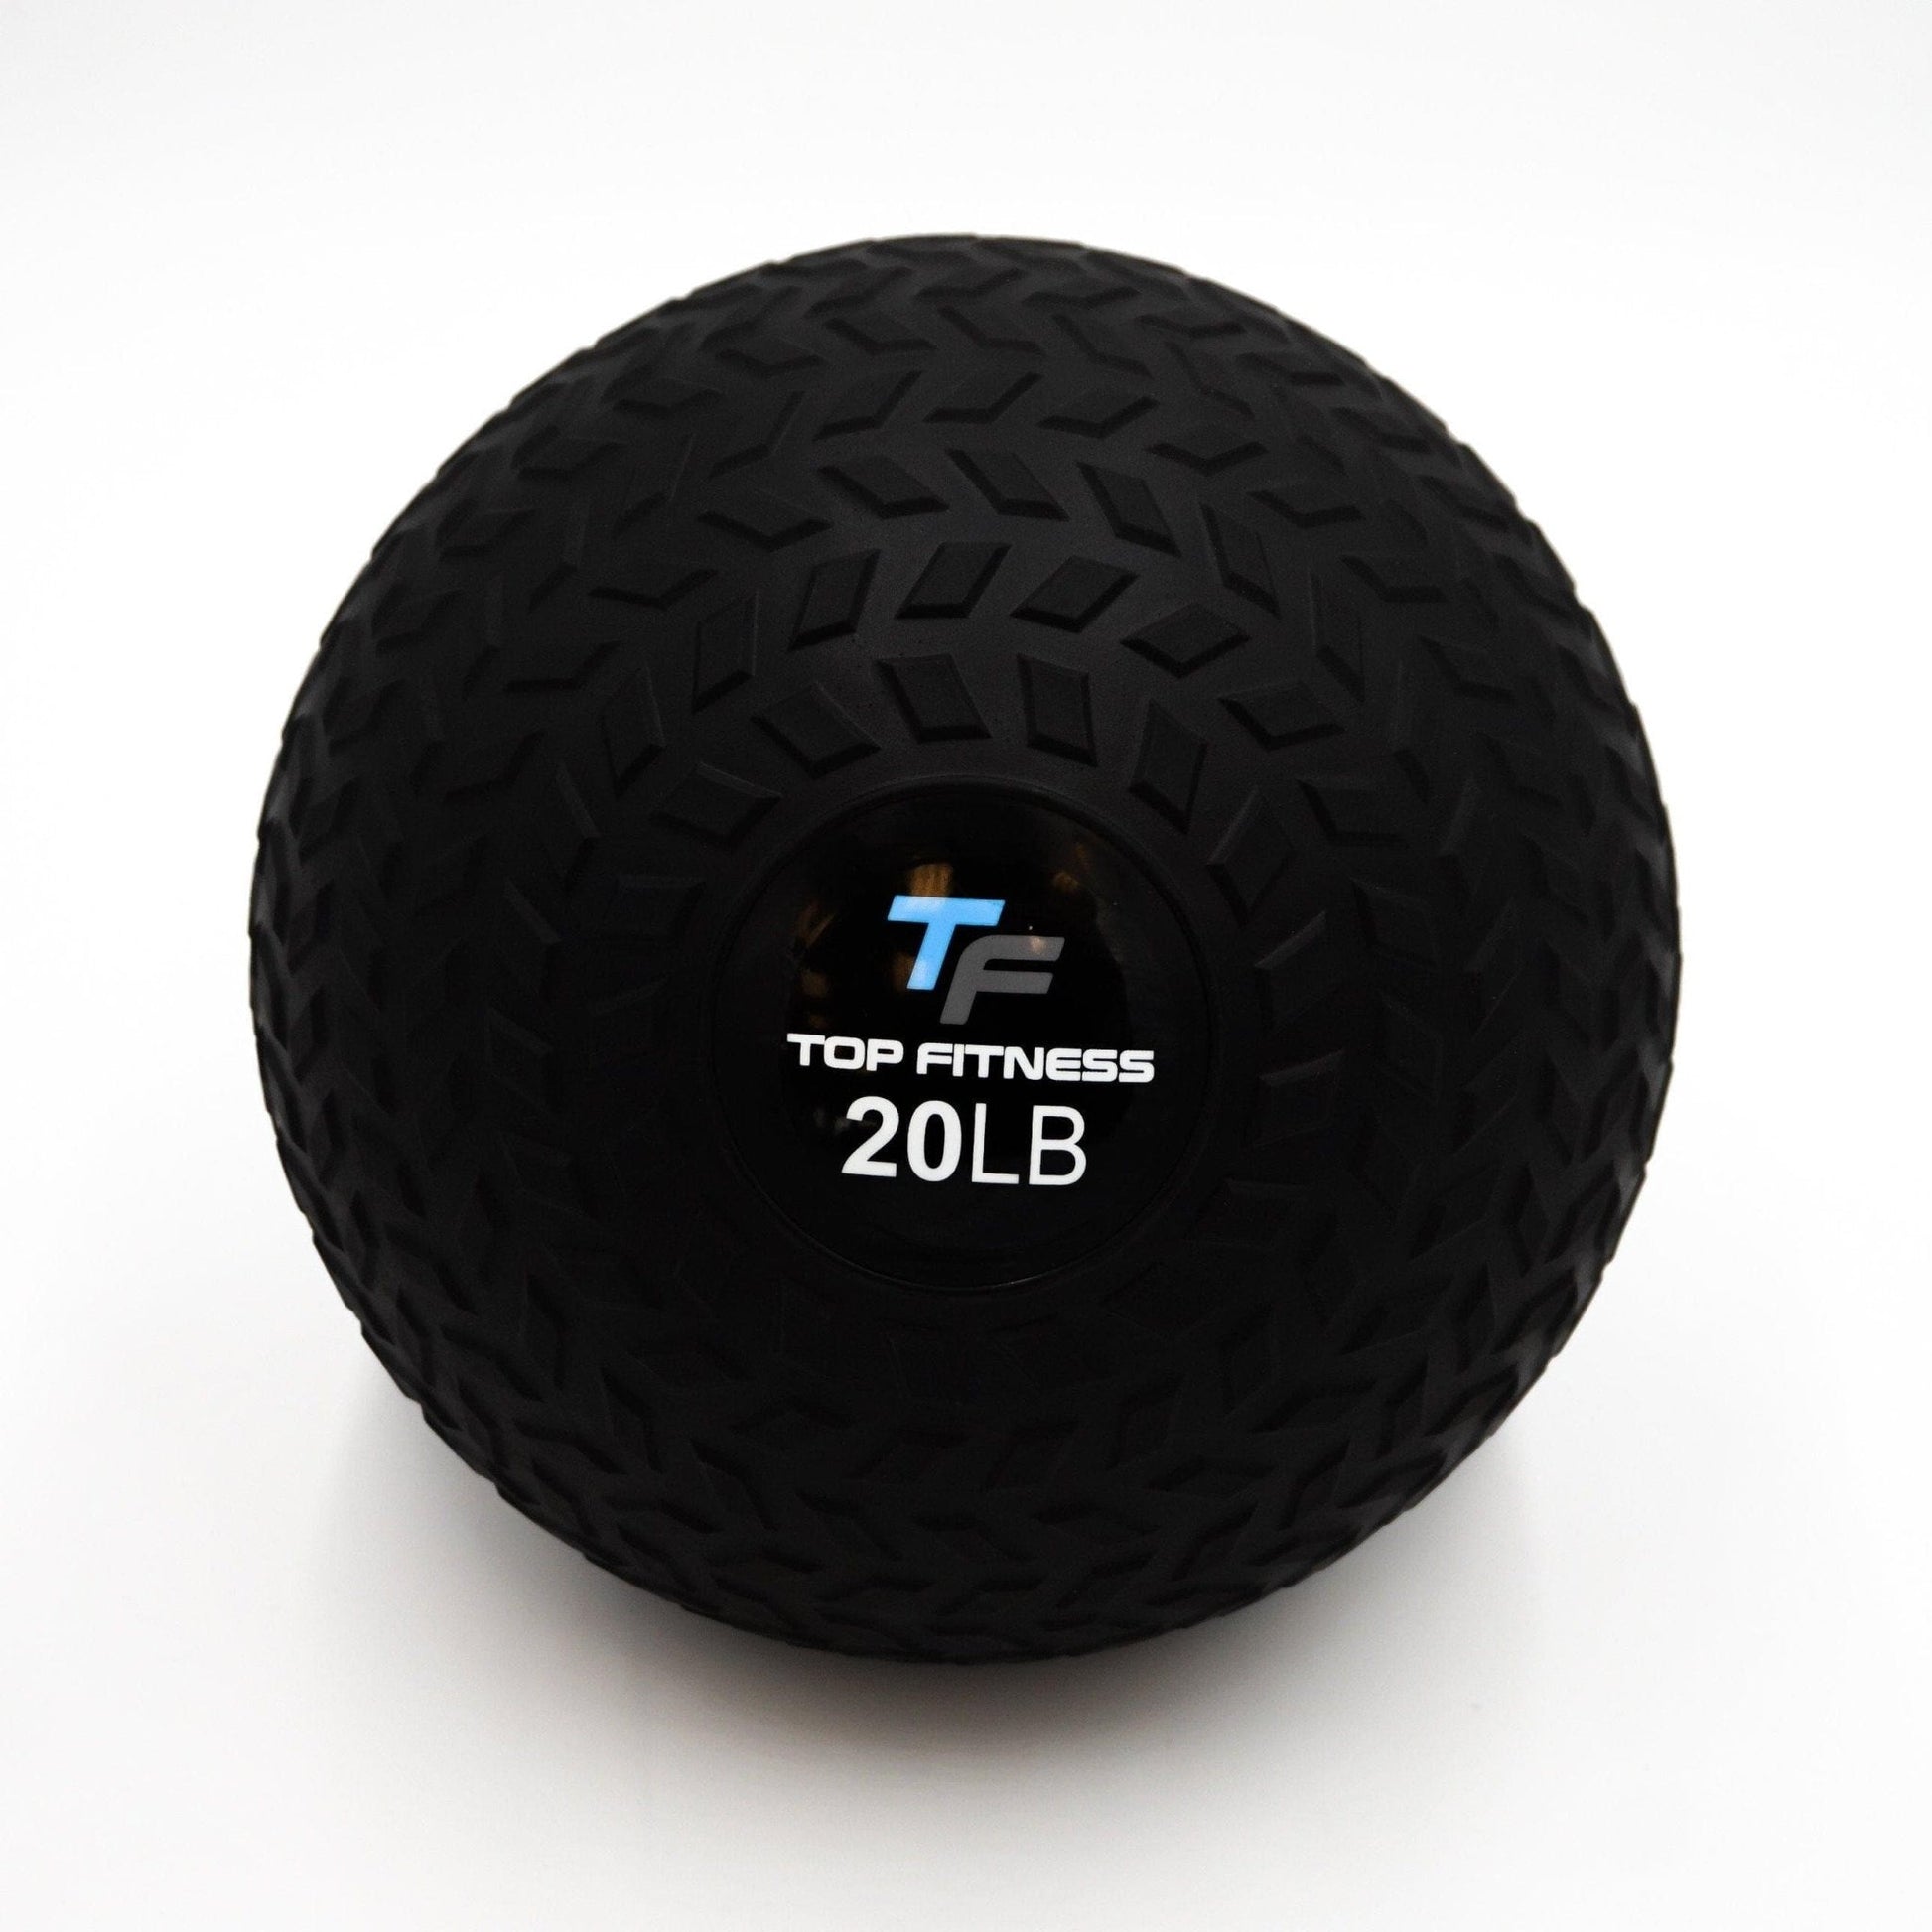 Top Fitness Slam Ball Weighted Resistance Top Fitness 20lb